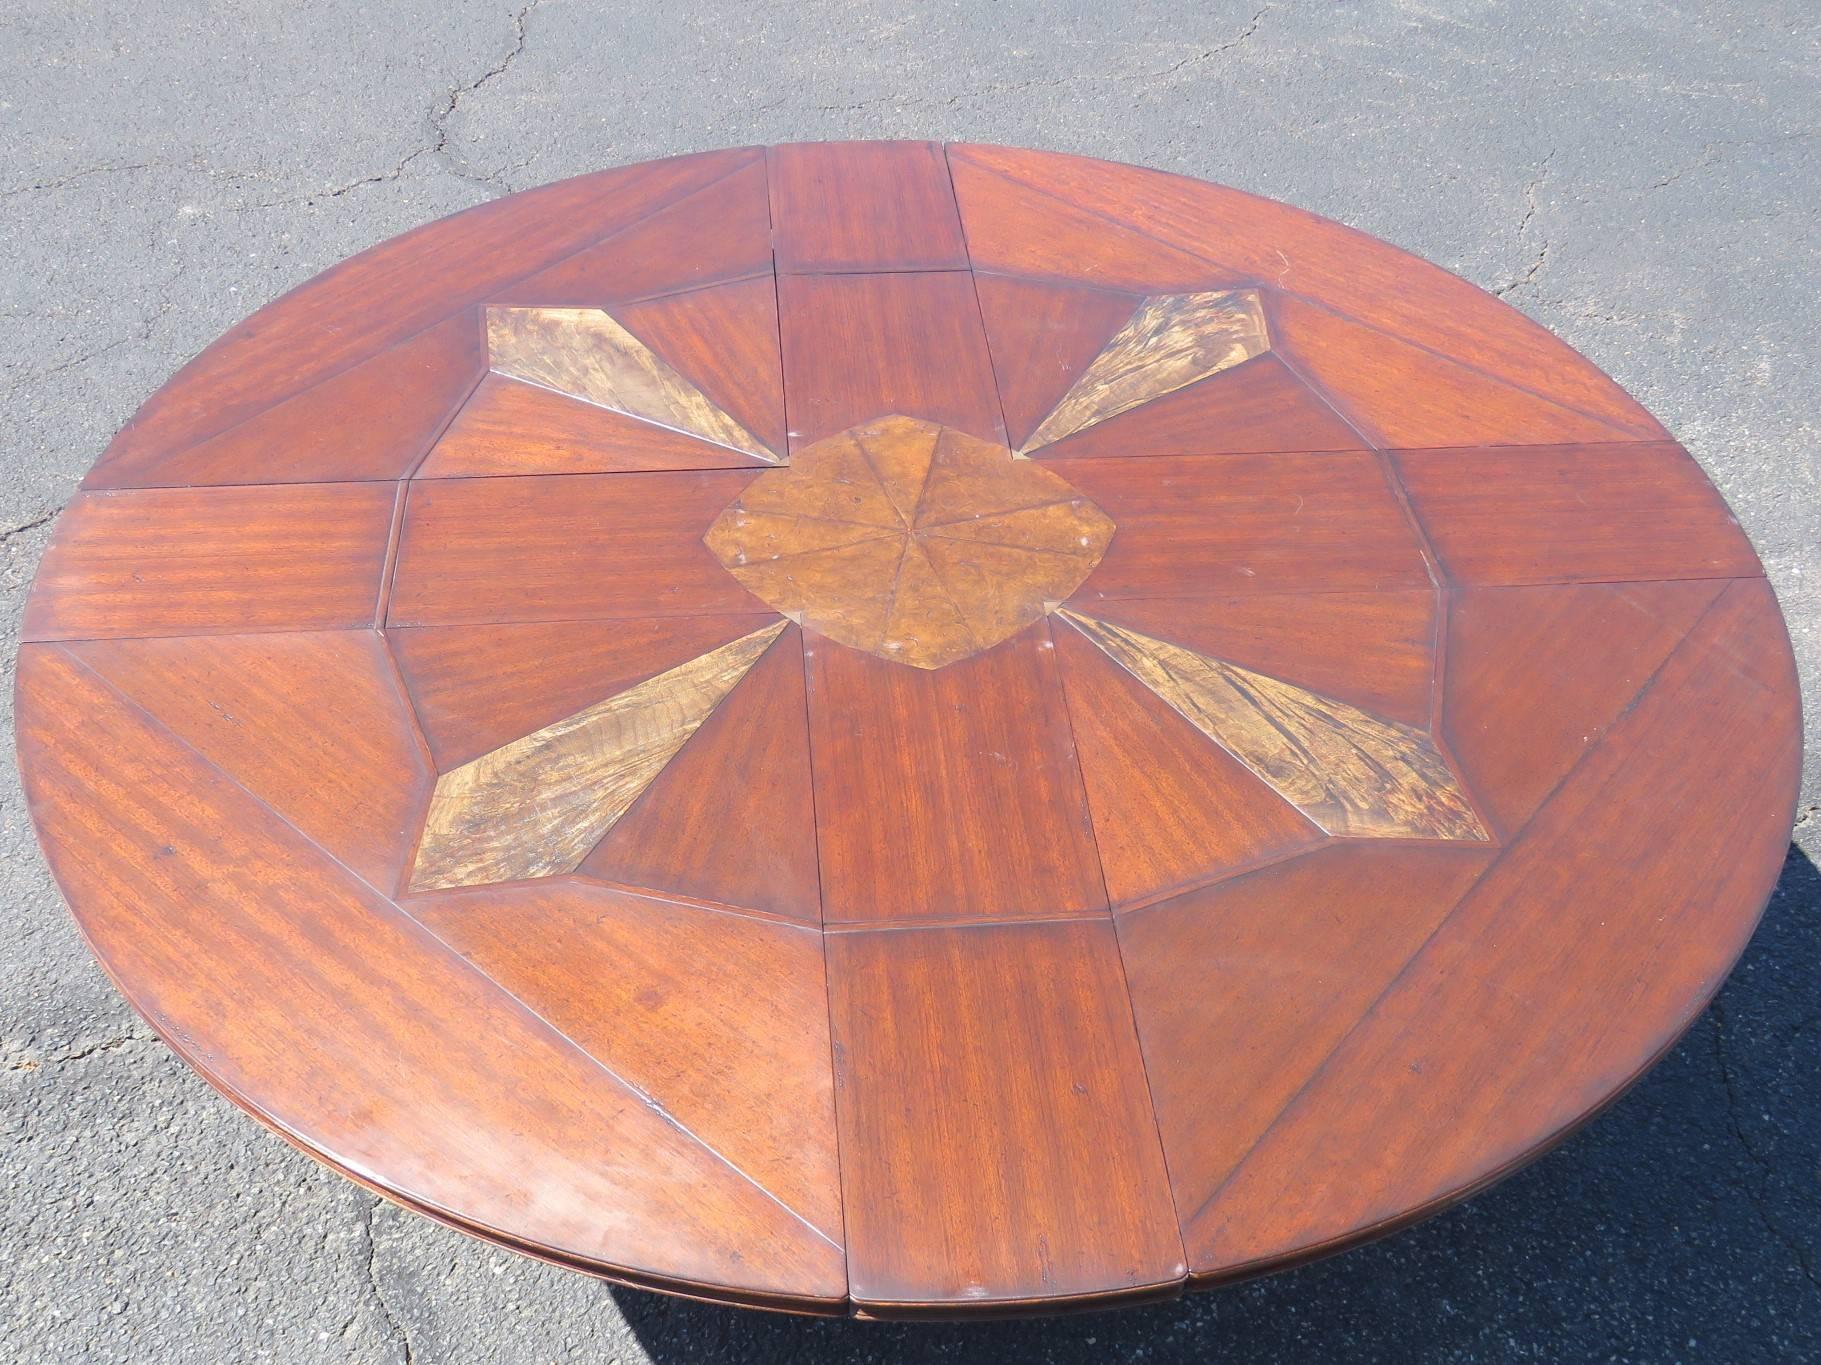 Inlaid top with carved base. Mechanical top spins to access lower boards.  73 3/4